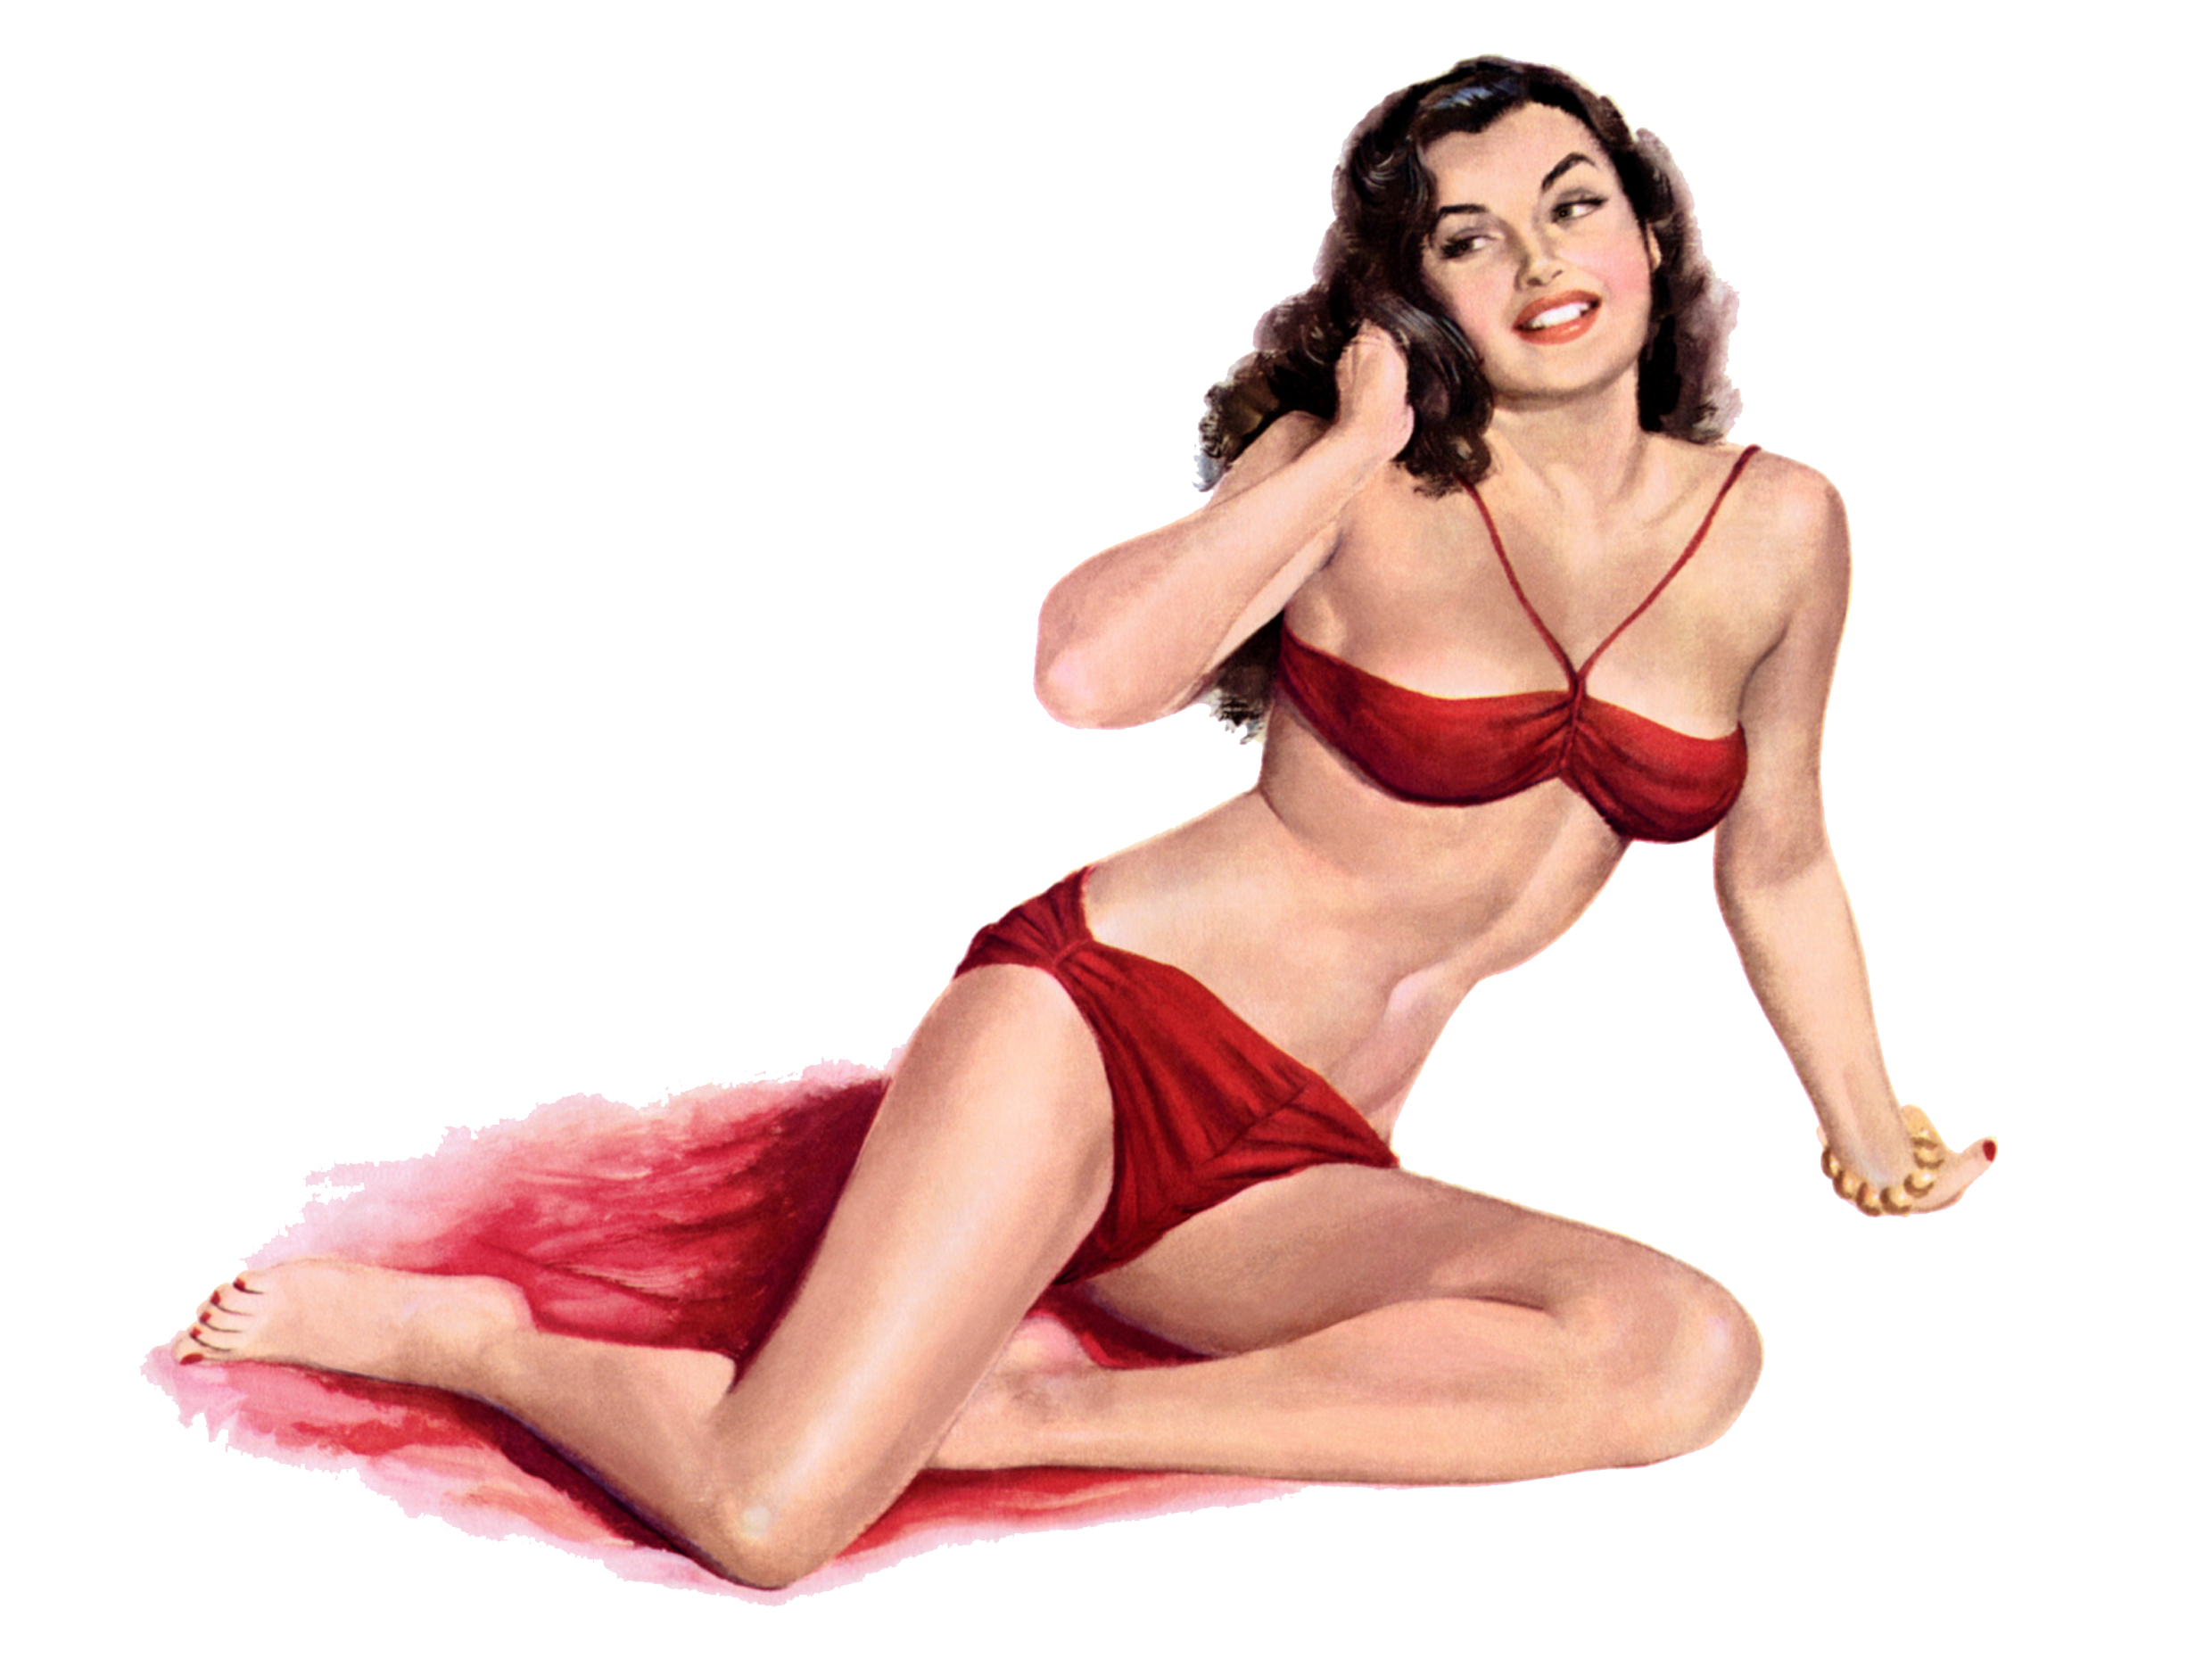 Pin up pin up bookmaker site